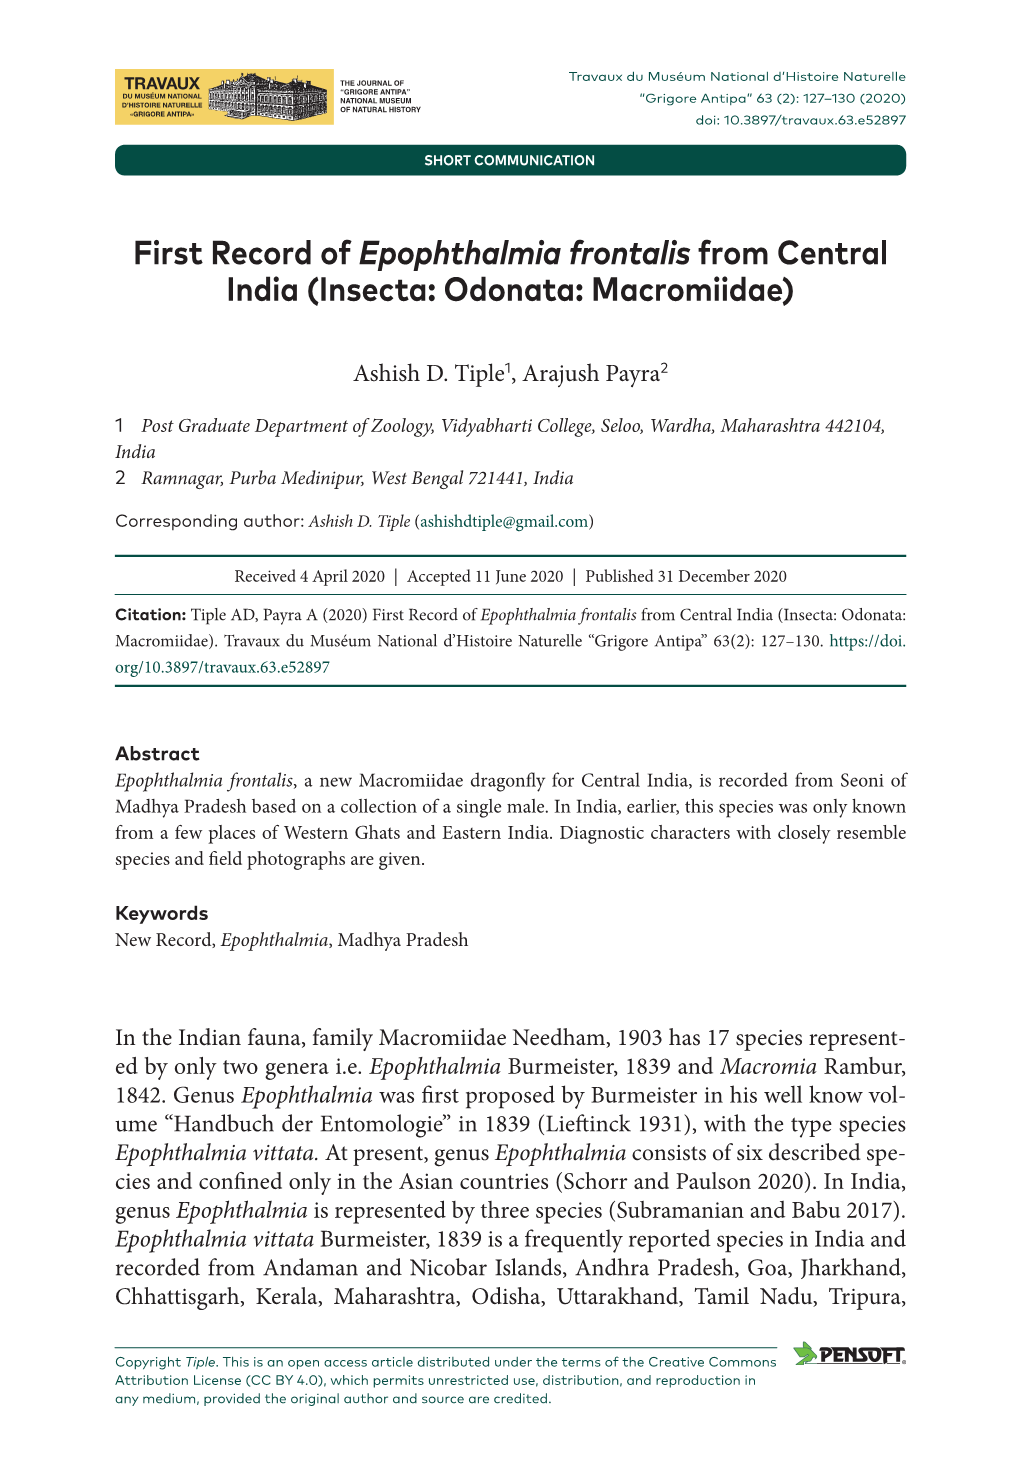 First Record of Epophthalmia Frontalis from Central India (Insecta: Odonata: Macromiidae)